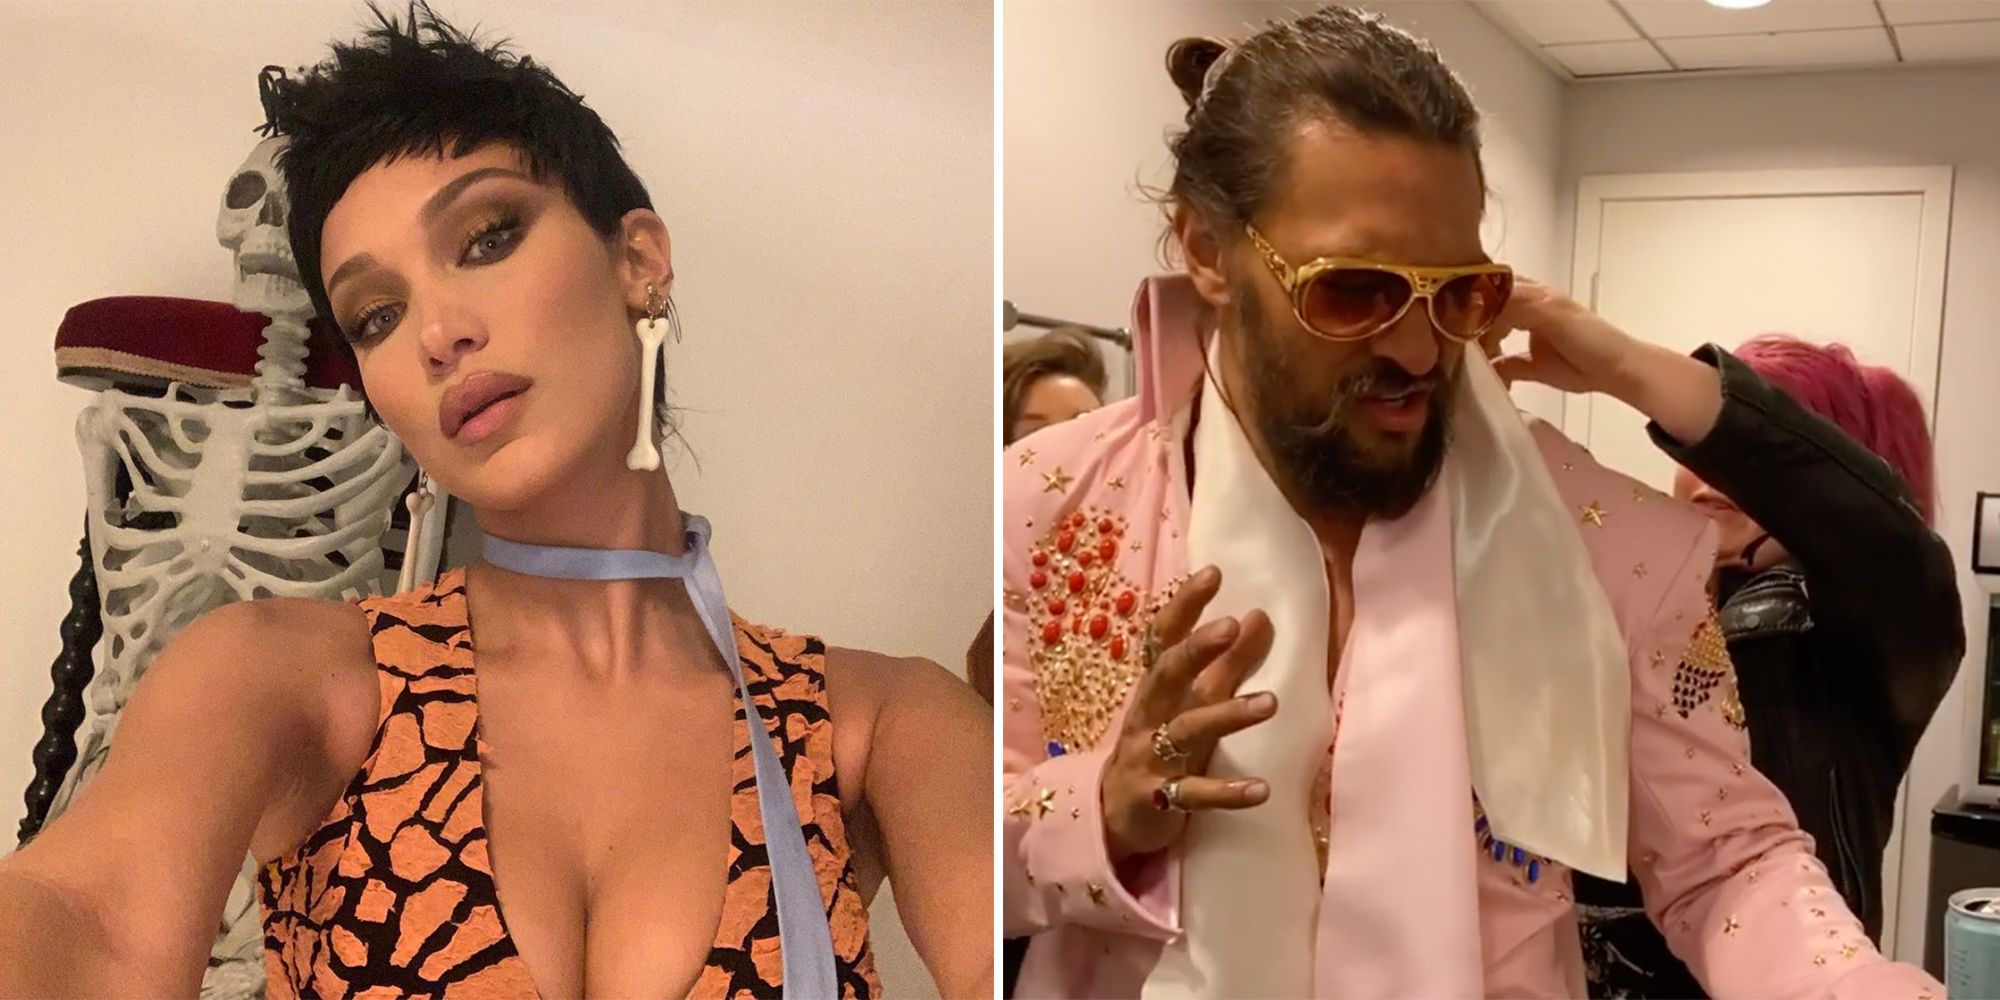 The best Canadian celebrity Halloween costumes of 2019